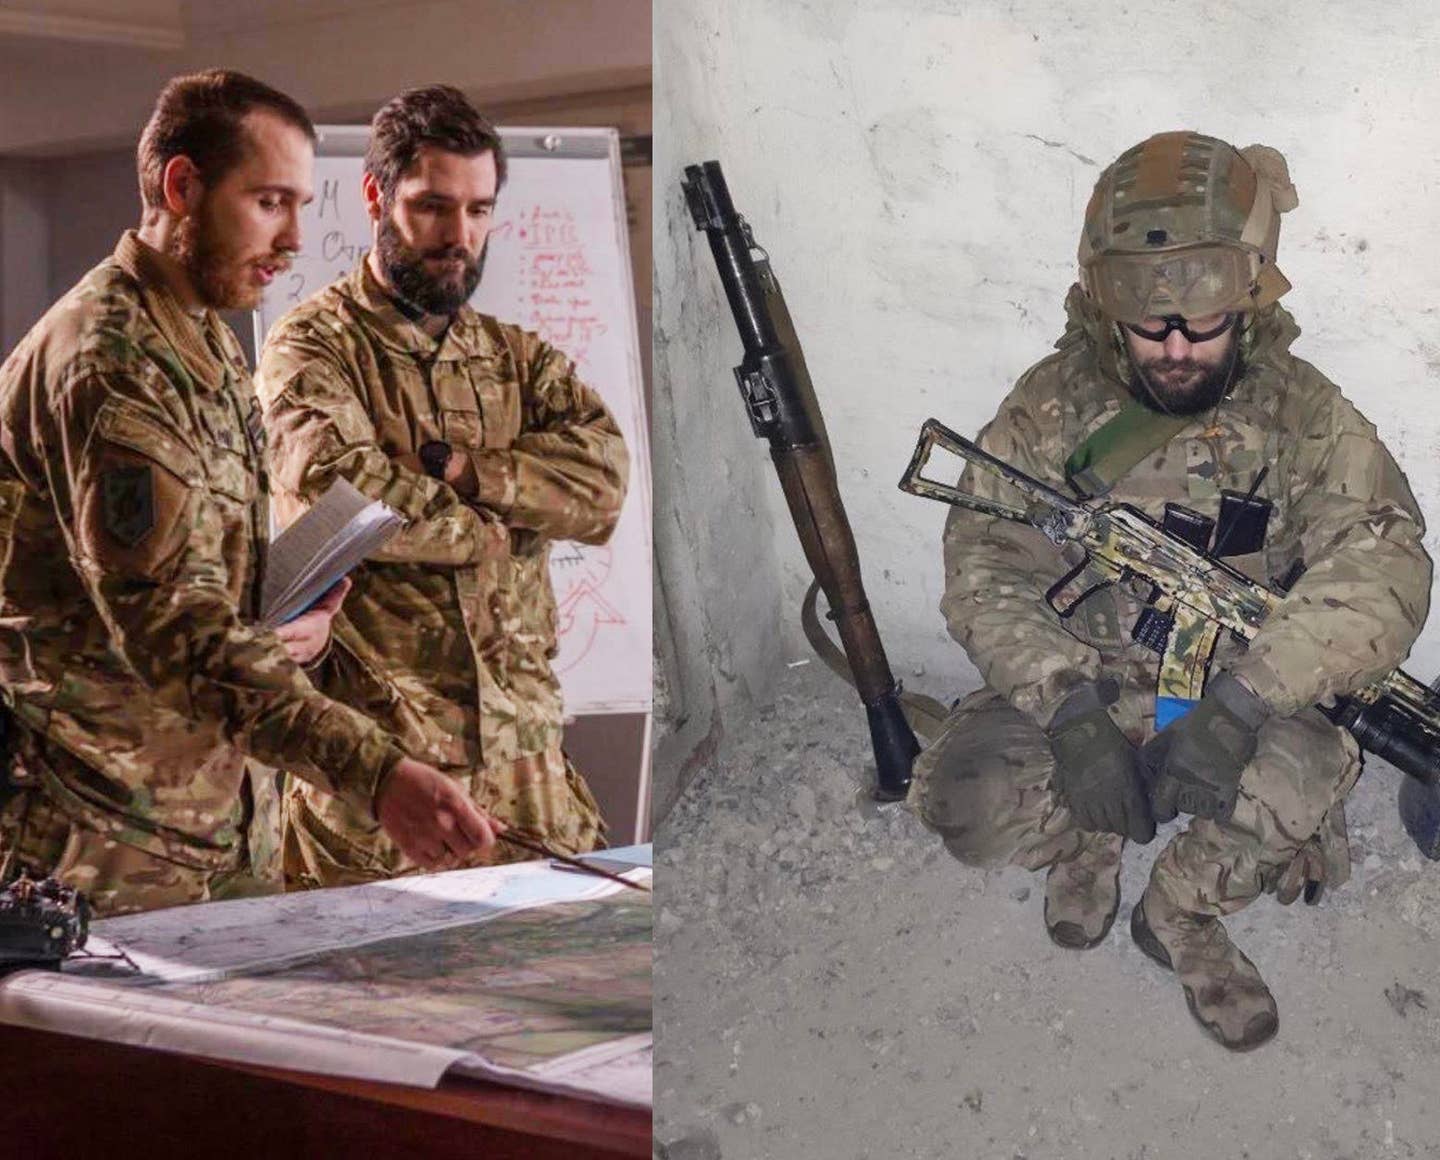 LEFT: Ukraine National Guard Maj. Bohdan Krotevych with Lt. Kharkov Andriy. Andriy was killed by Russian special forces, when they assaulted the house fire position he was commanding. He died covering his friends, Krotevych said. RIGHT: Kortevych during combat operations. (Photos courtesy Bohdan Kortevych).